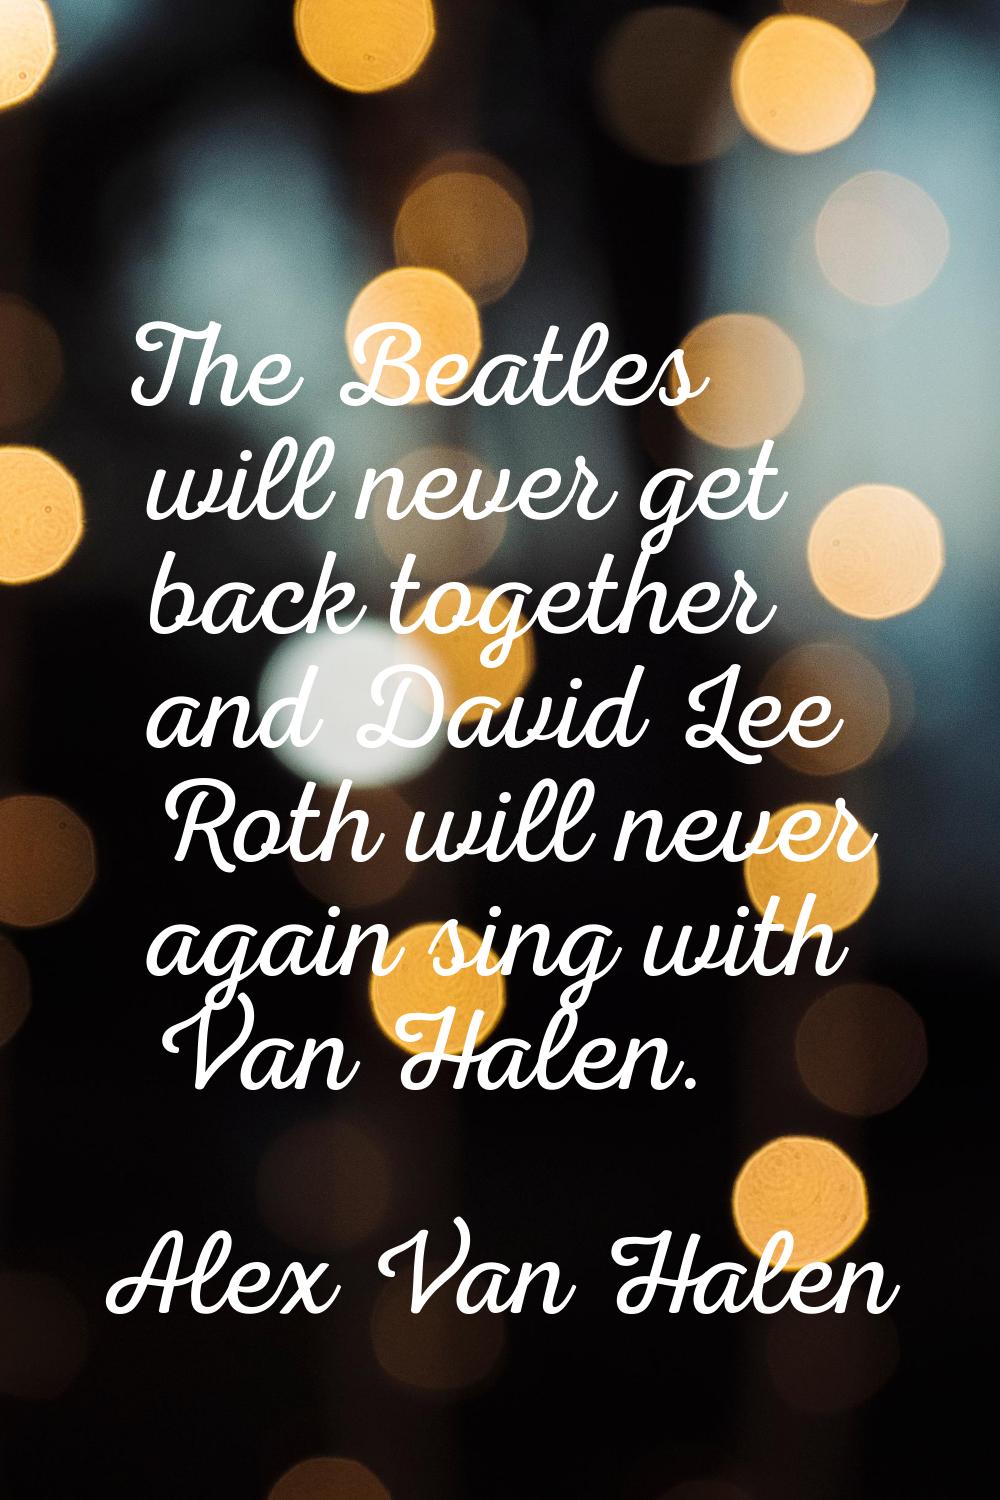 The Beatles will never get back together and David Lee Roth will never again sing with Van Halen.